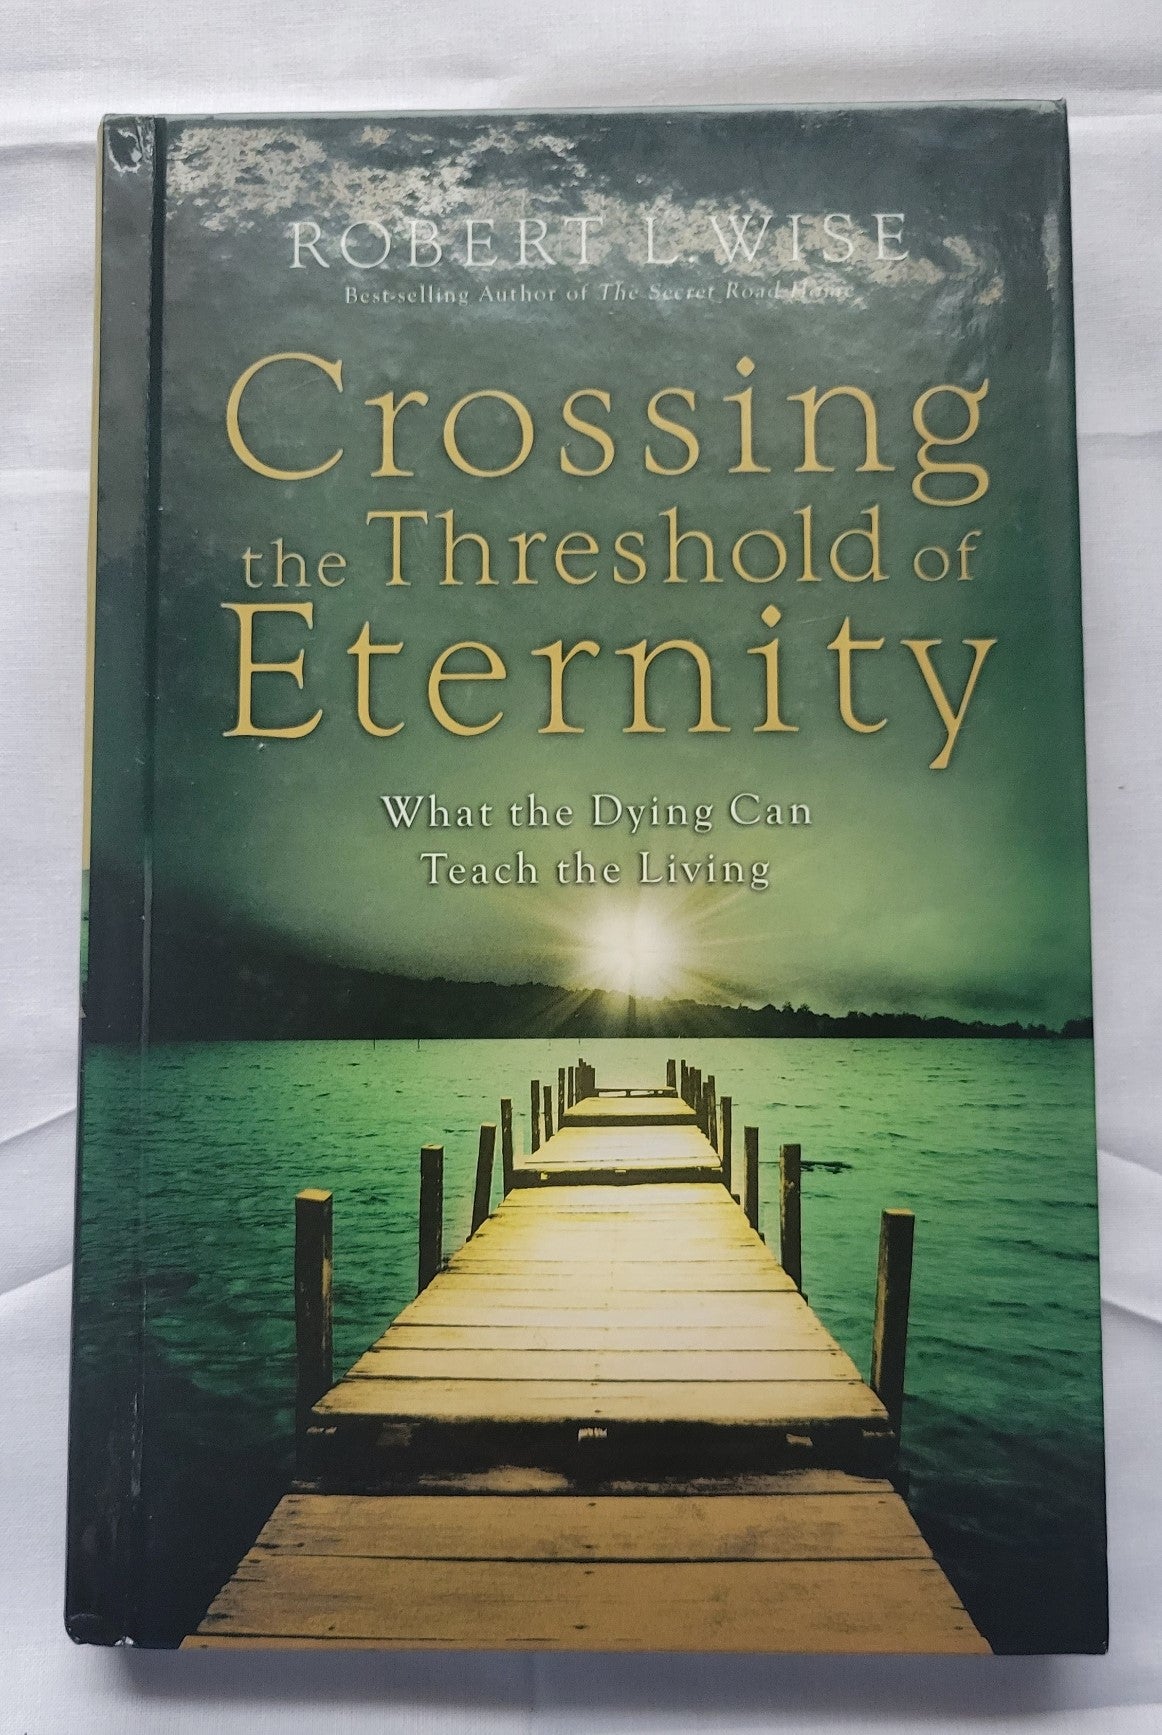 Used book "Crossing the Threshold of Eternity: What the Dying Can Teach the Living" by Dr. Robert L. Wise, published by Gospel Light, 2007. View of front cover.